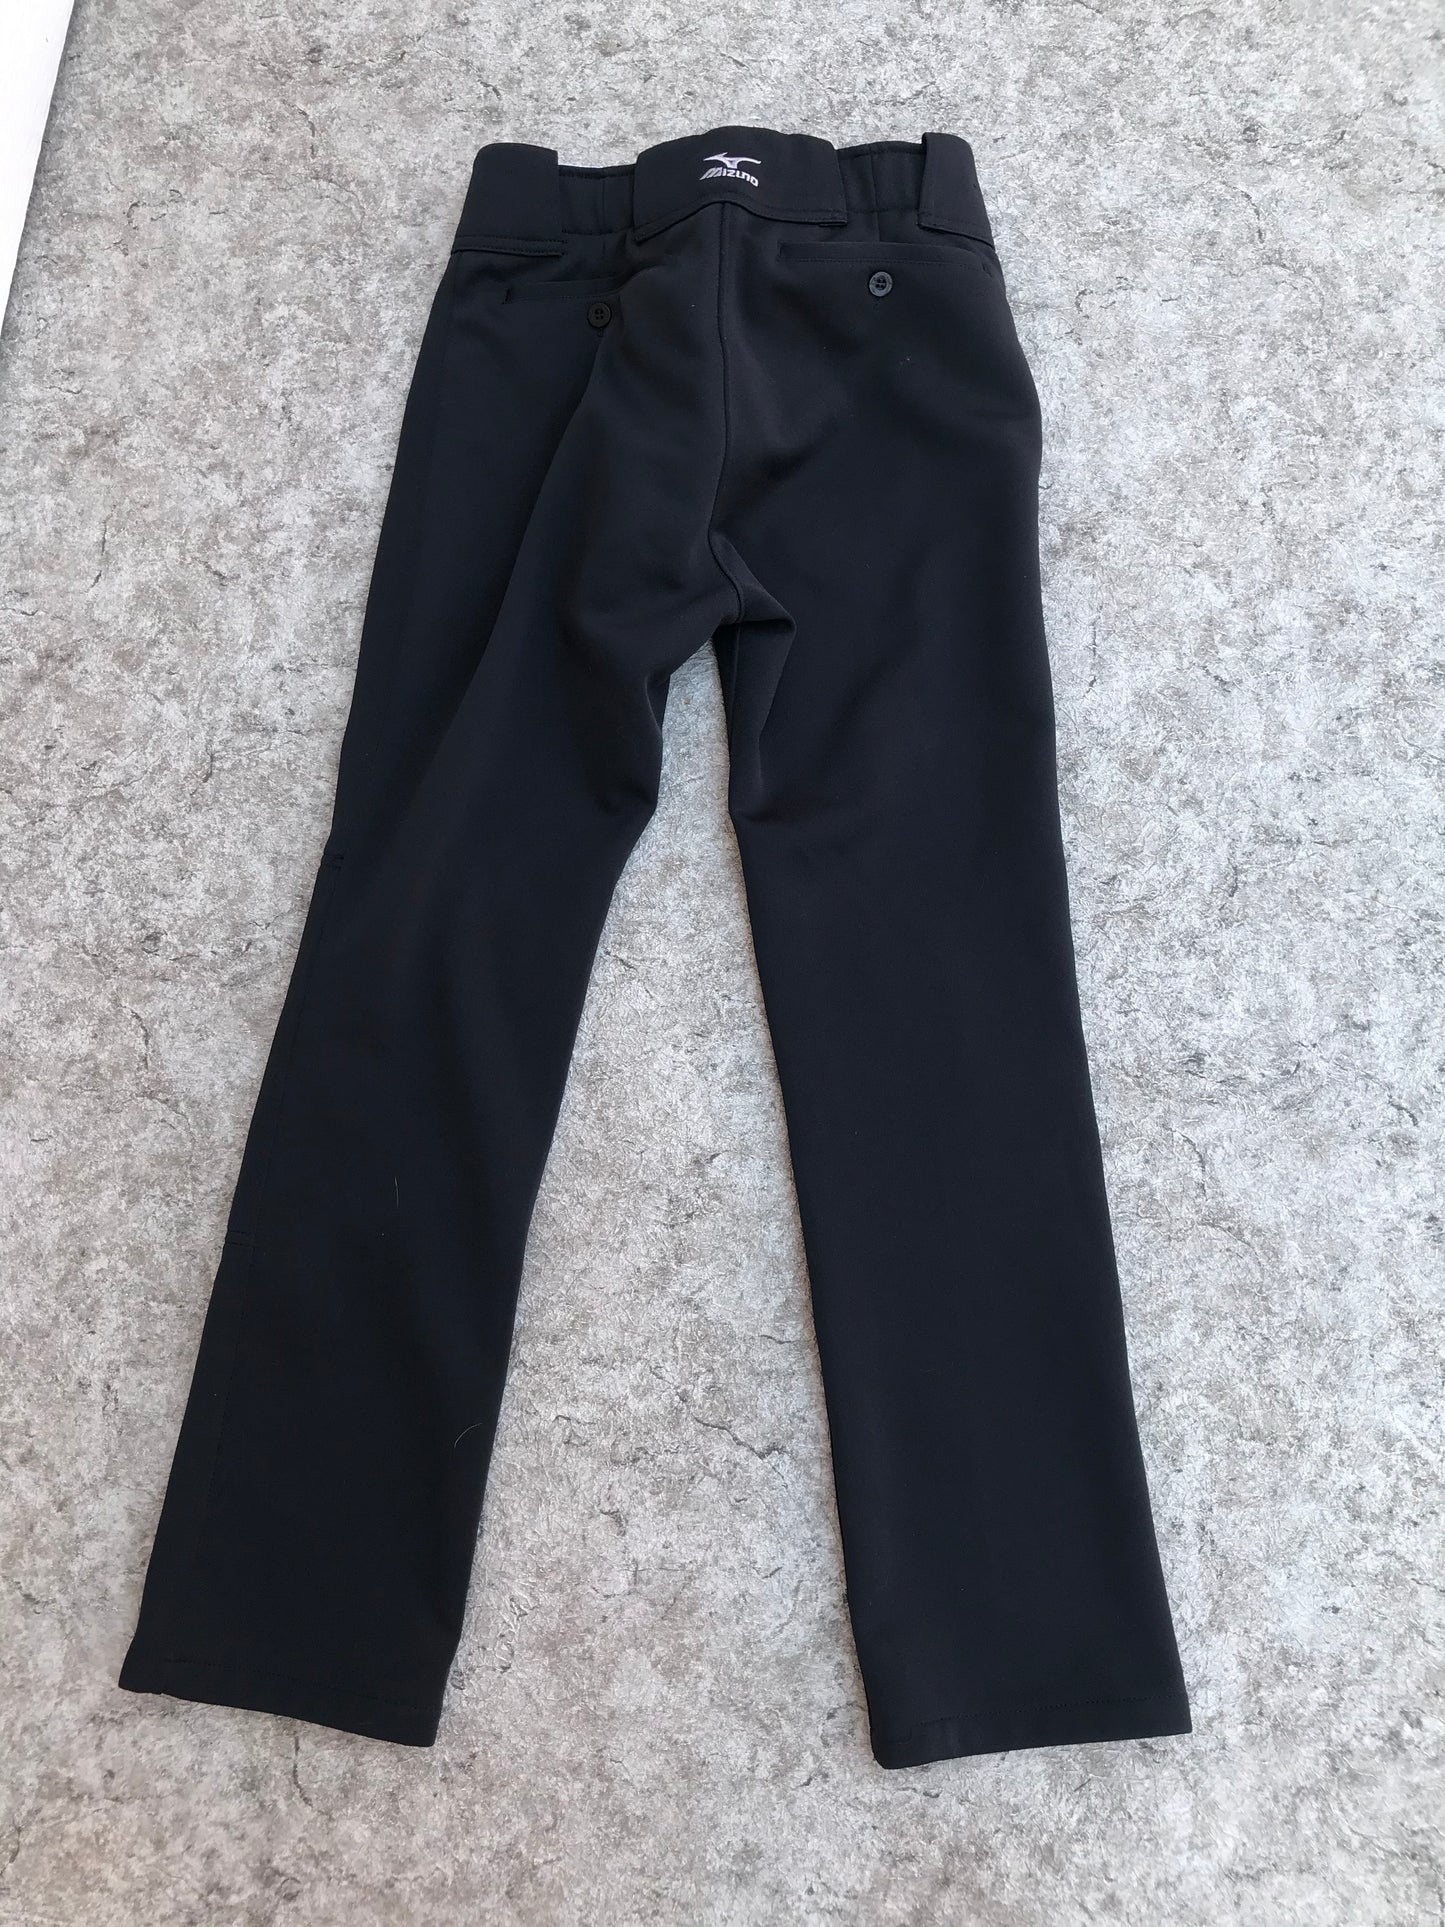 Baseball Pants Child Size X large Youth Mizuno Black Excellent